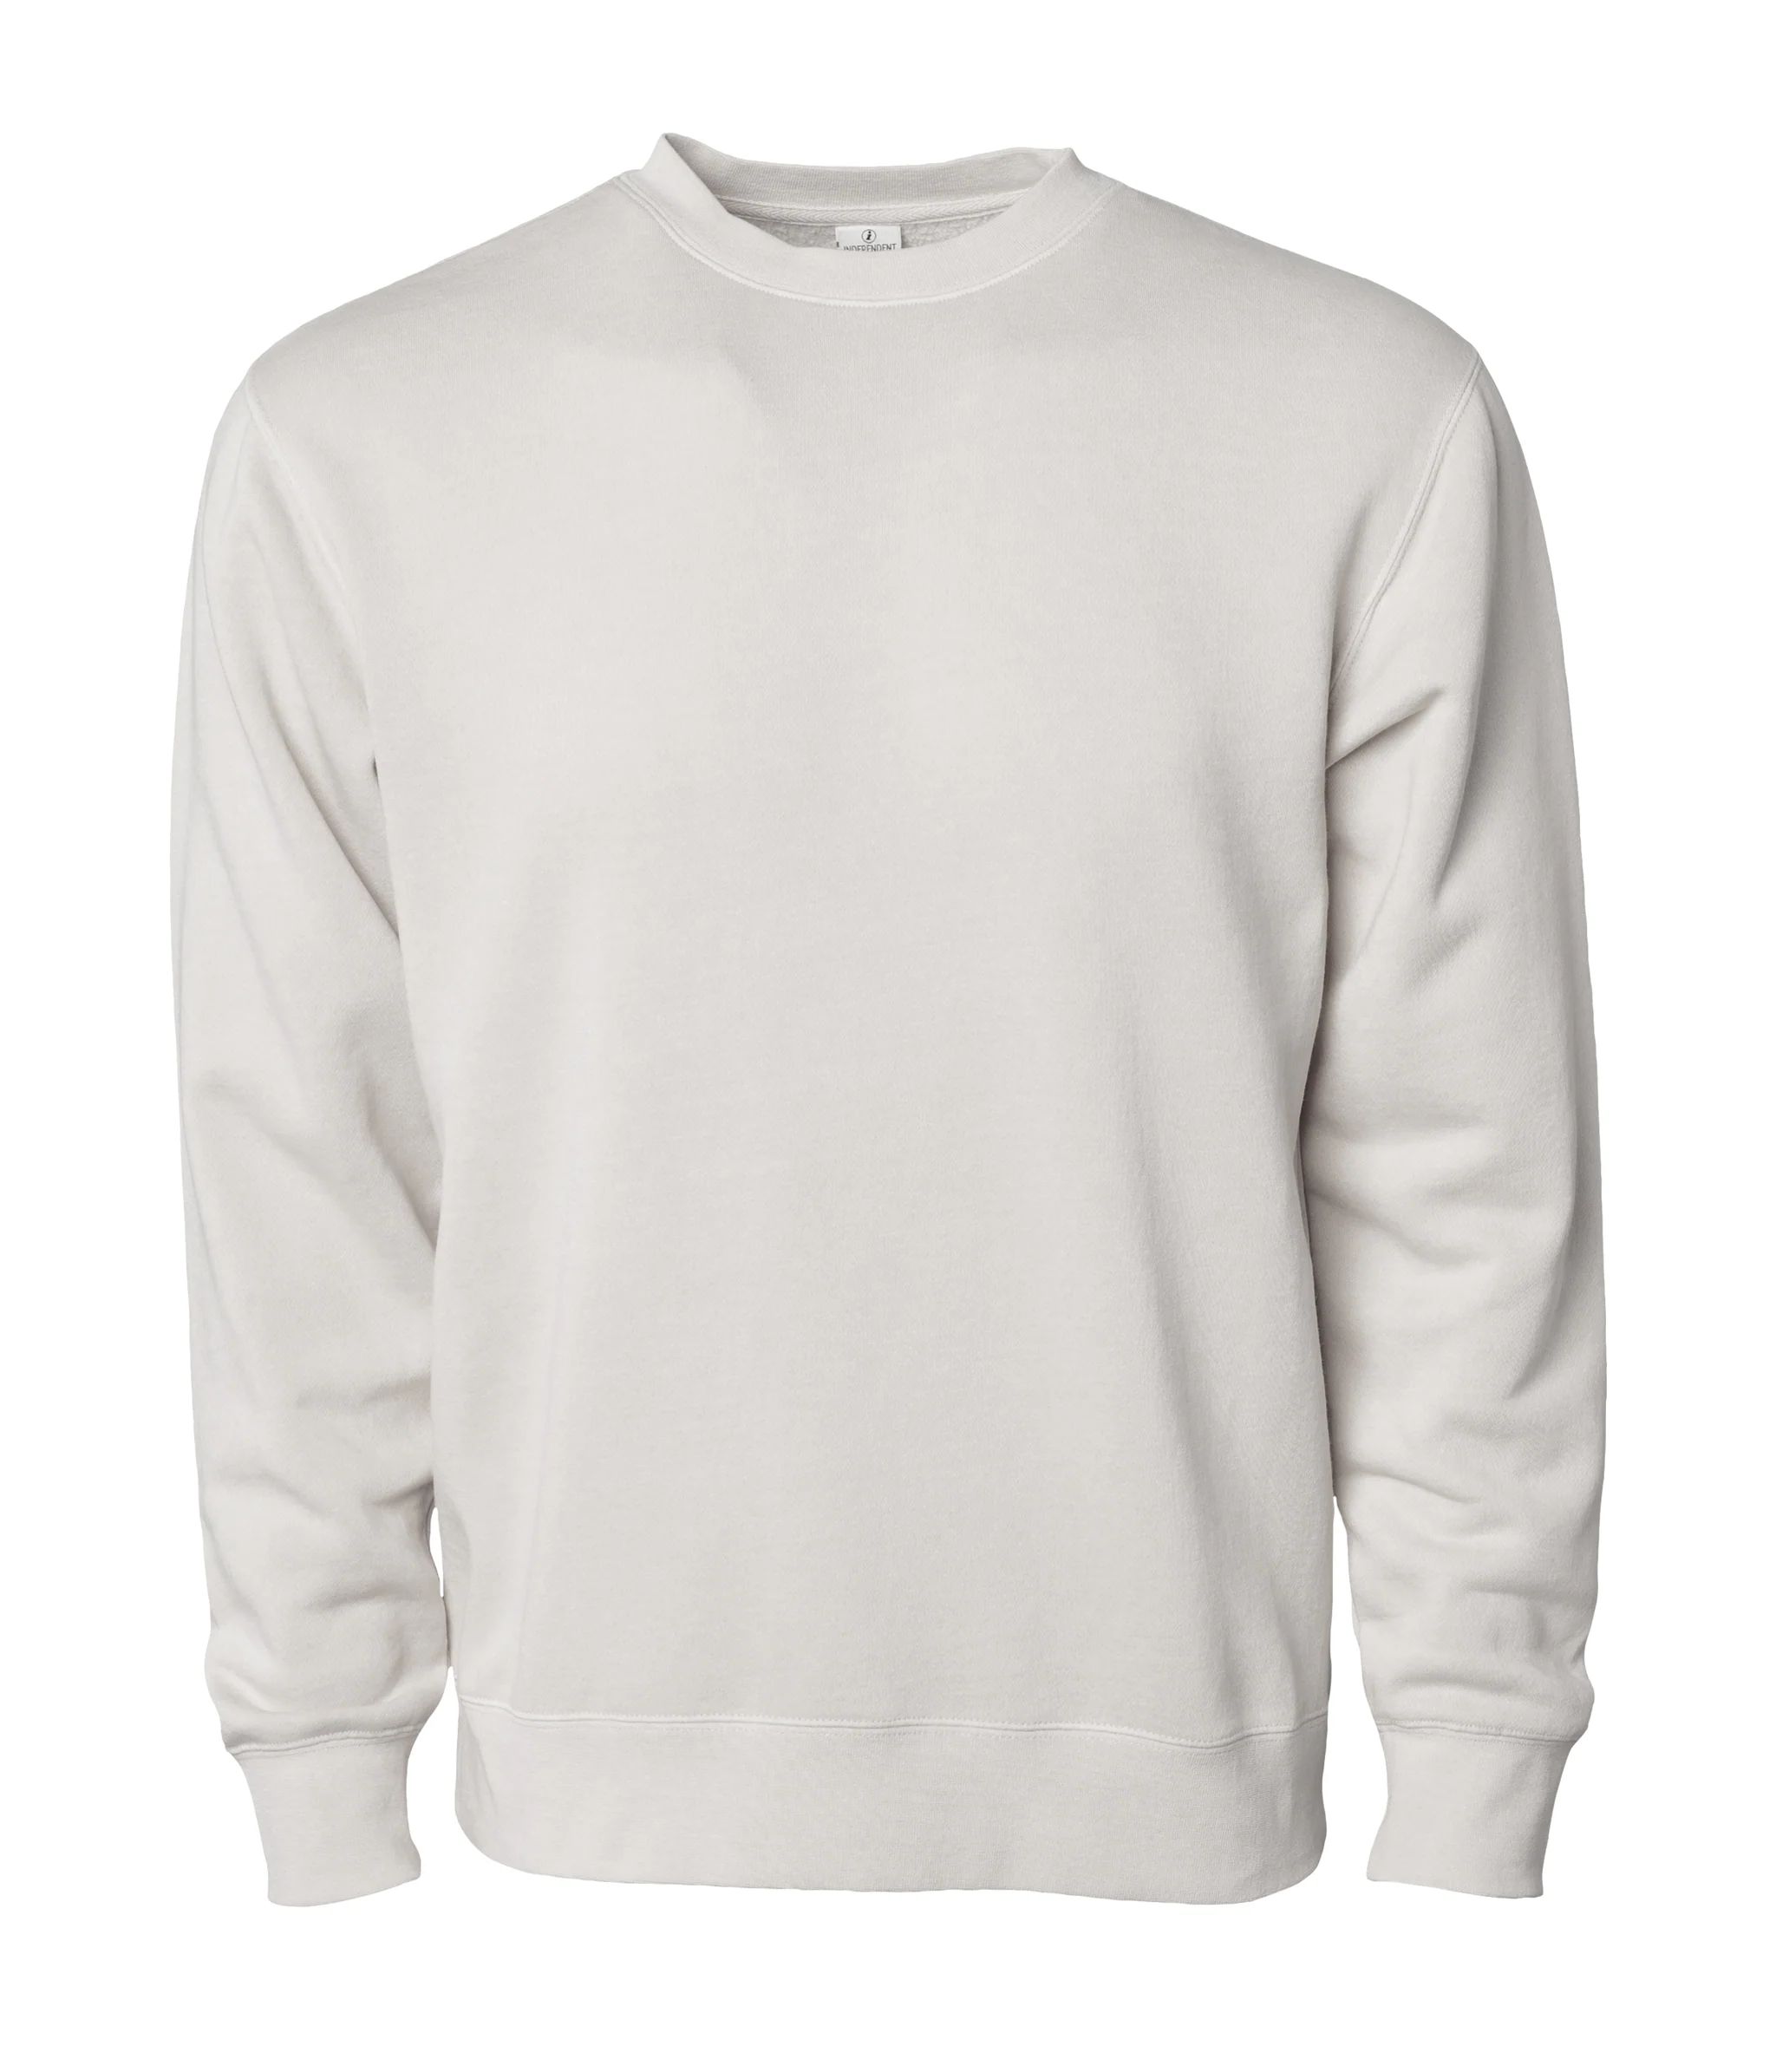 Unisex Midweight Pigment Dyed Crew Neck | Independent Trading Co